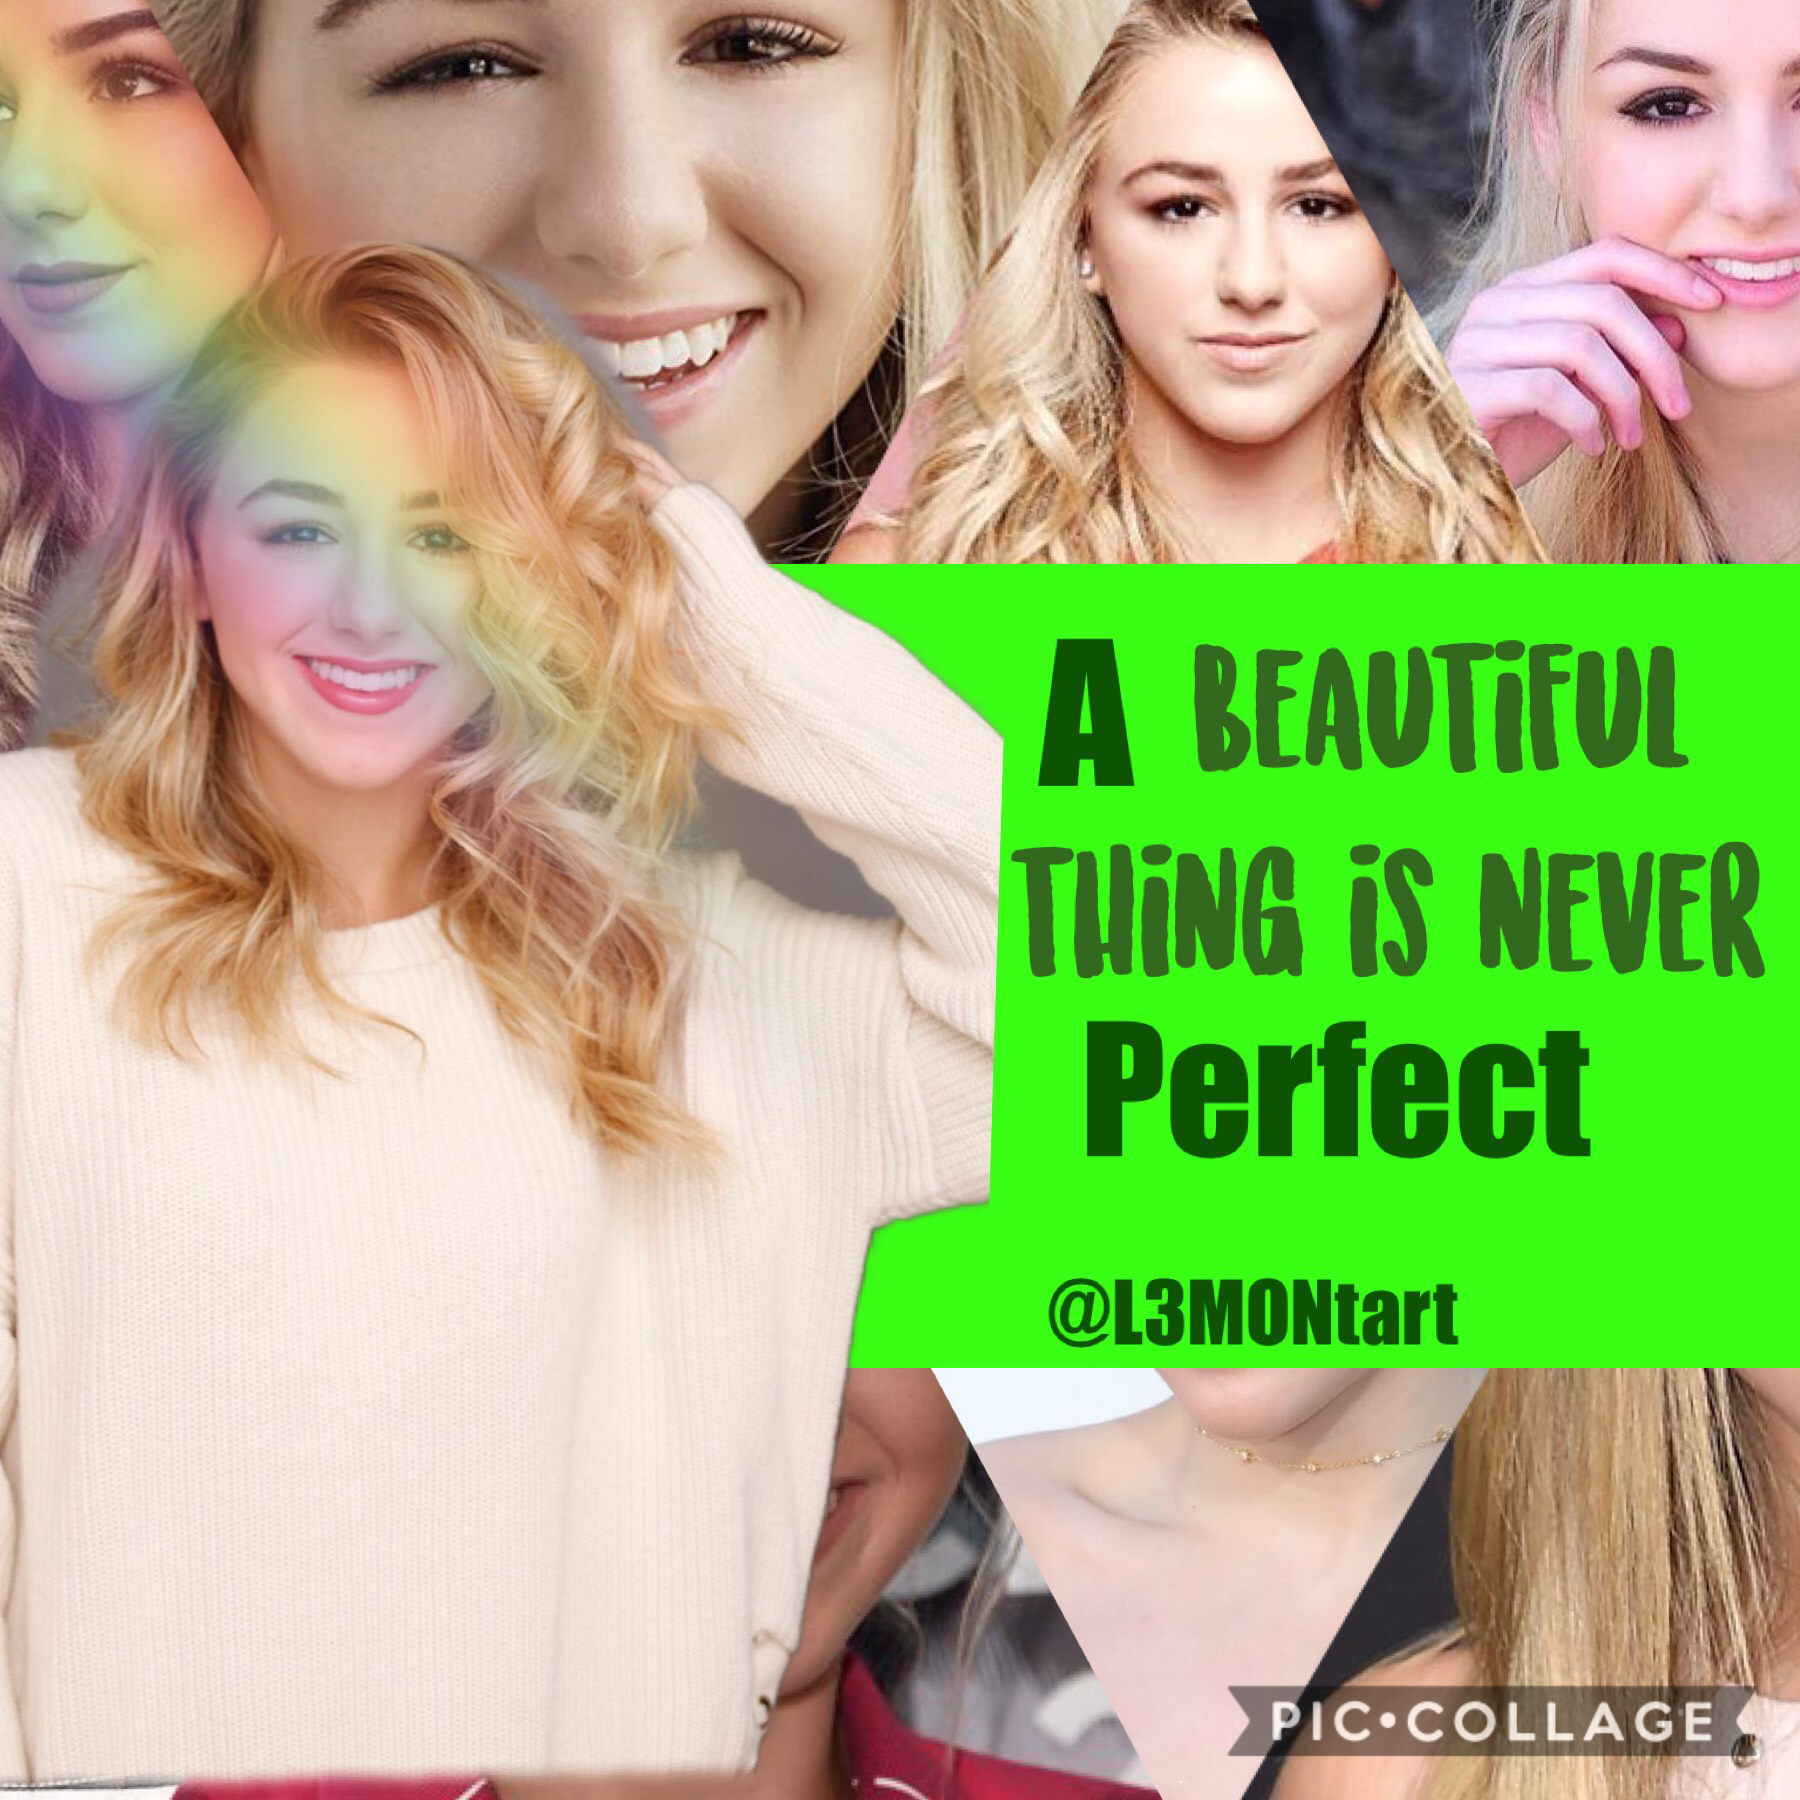 It’s Chloe Lukasiak!!! Tapp!!
I love this type of collage.

QOTD: do you like this style?
AOTD: your choice